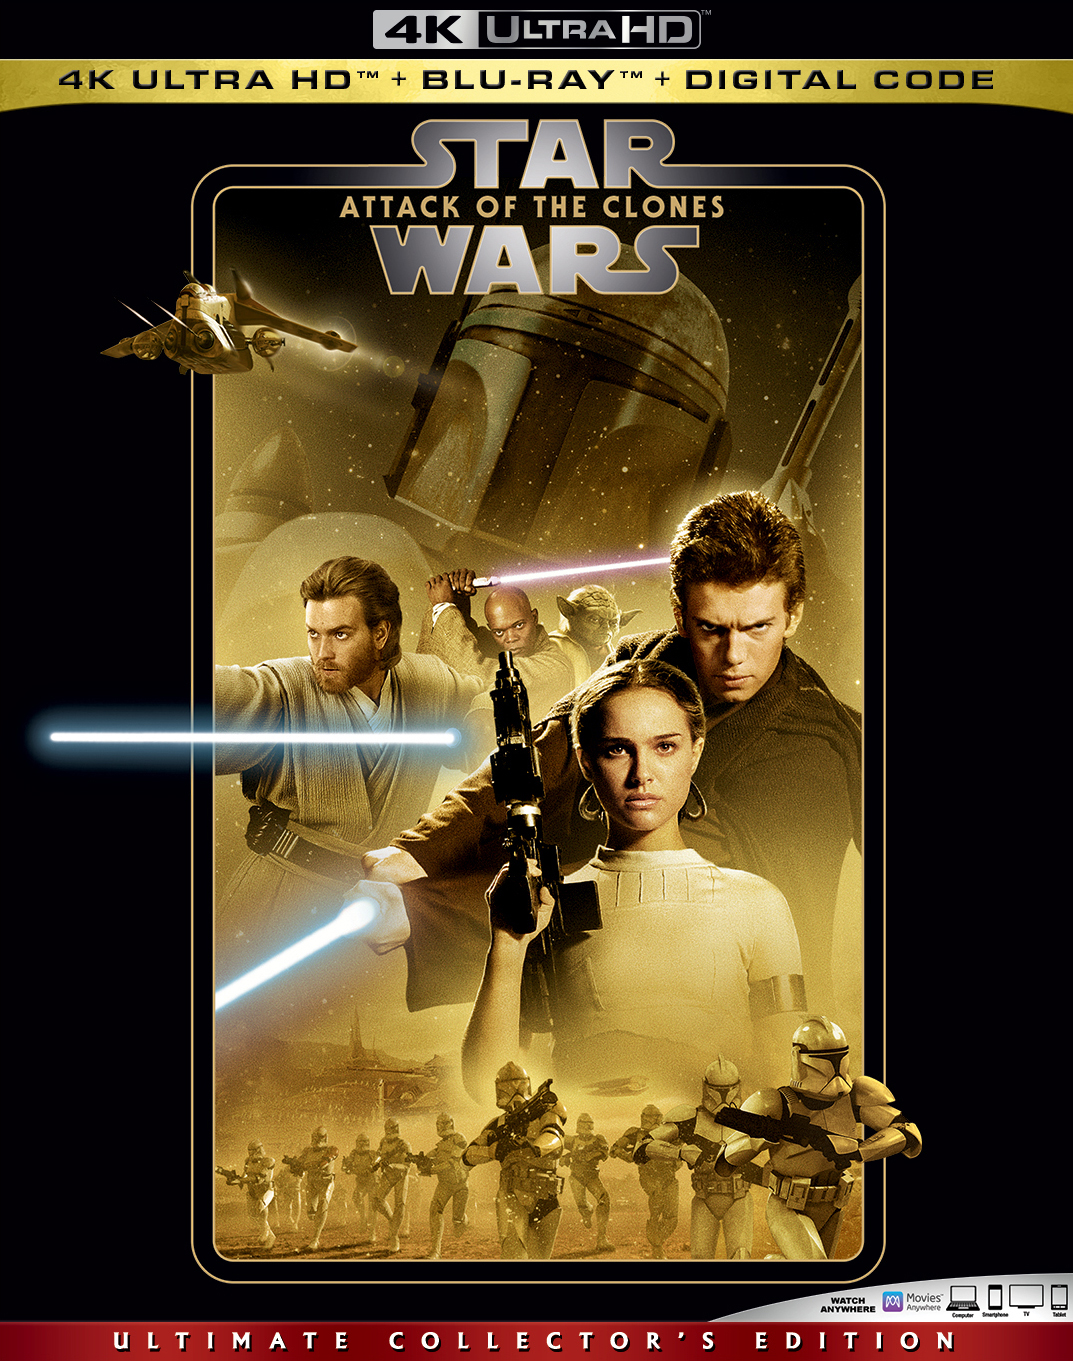 4K Blu-ray Star Wars Episode II:Attack of The Clones